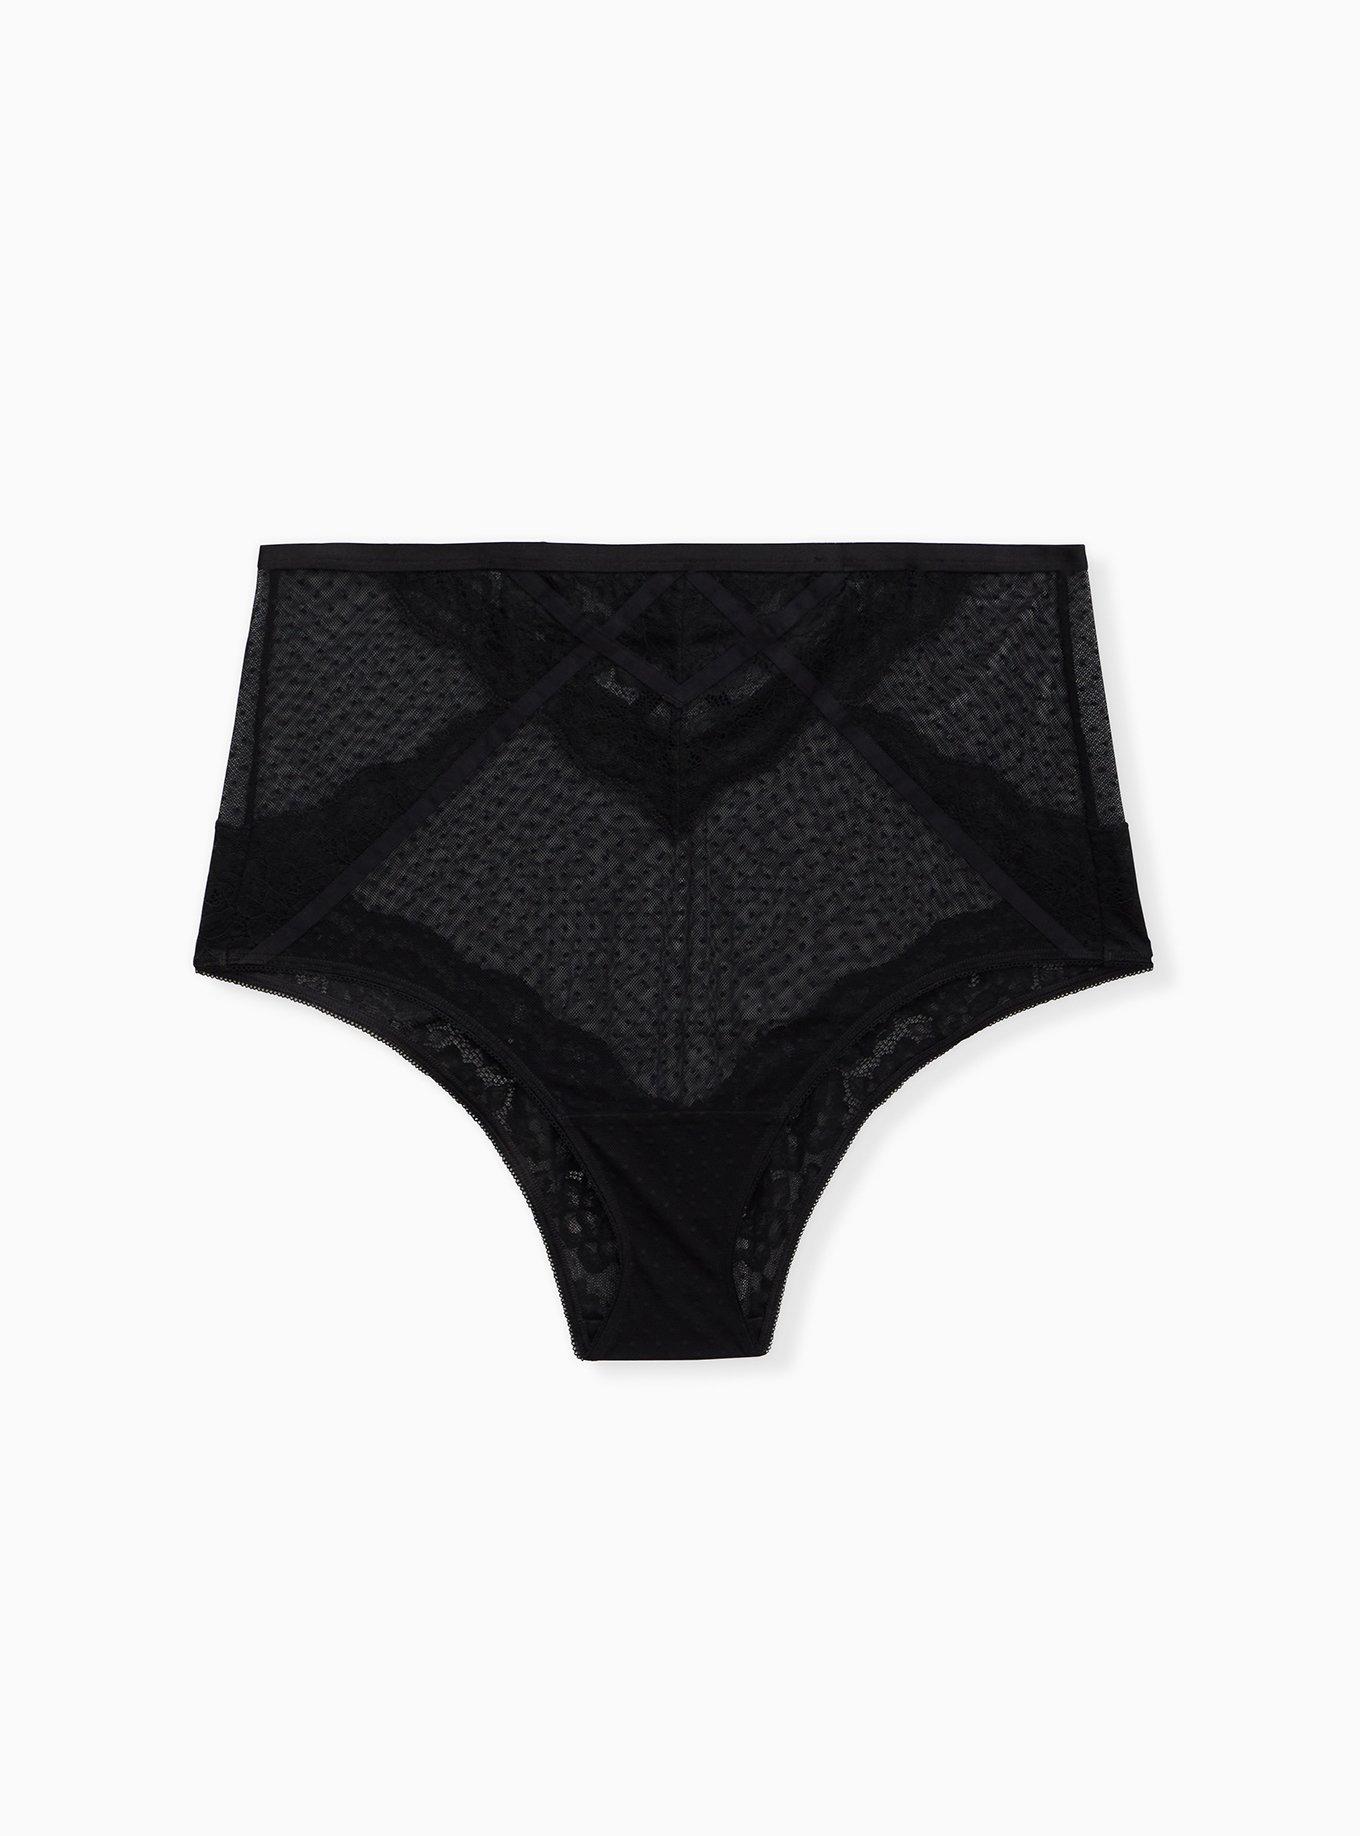 Plus Size - Dot Mesh & Lace Strappy Caged High Waist Brief Panty - Torrid